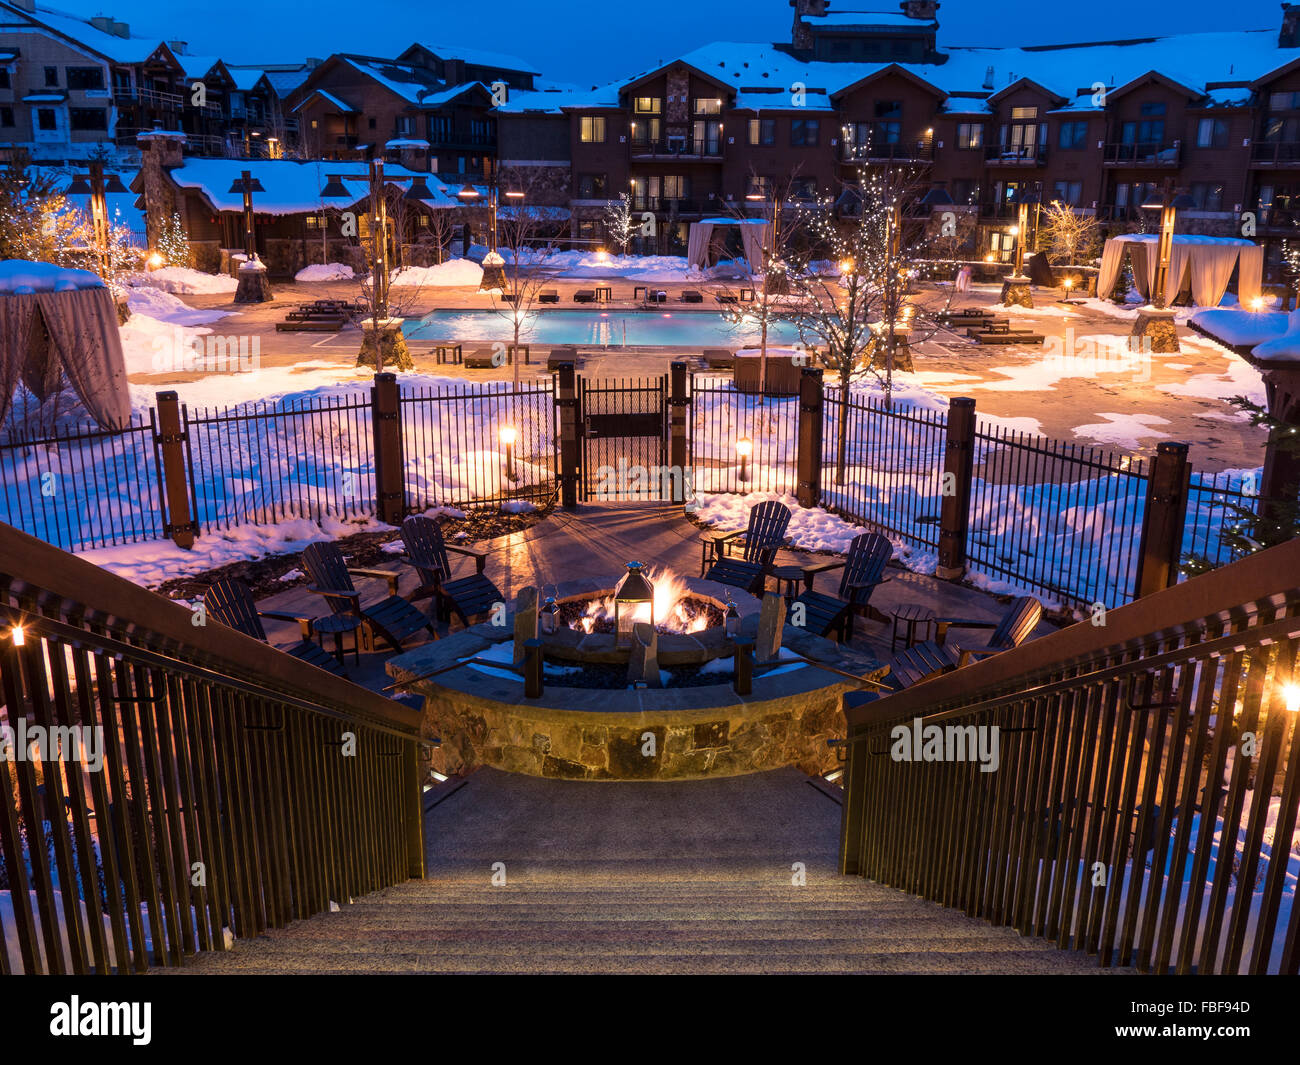 Fire pit and pool at dusk, Waldorf Astoria, Park City, Utah. Stock Photo